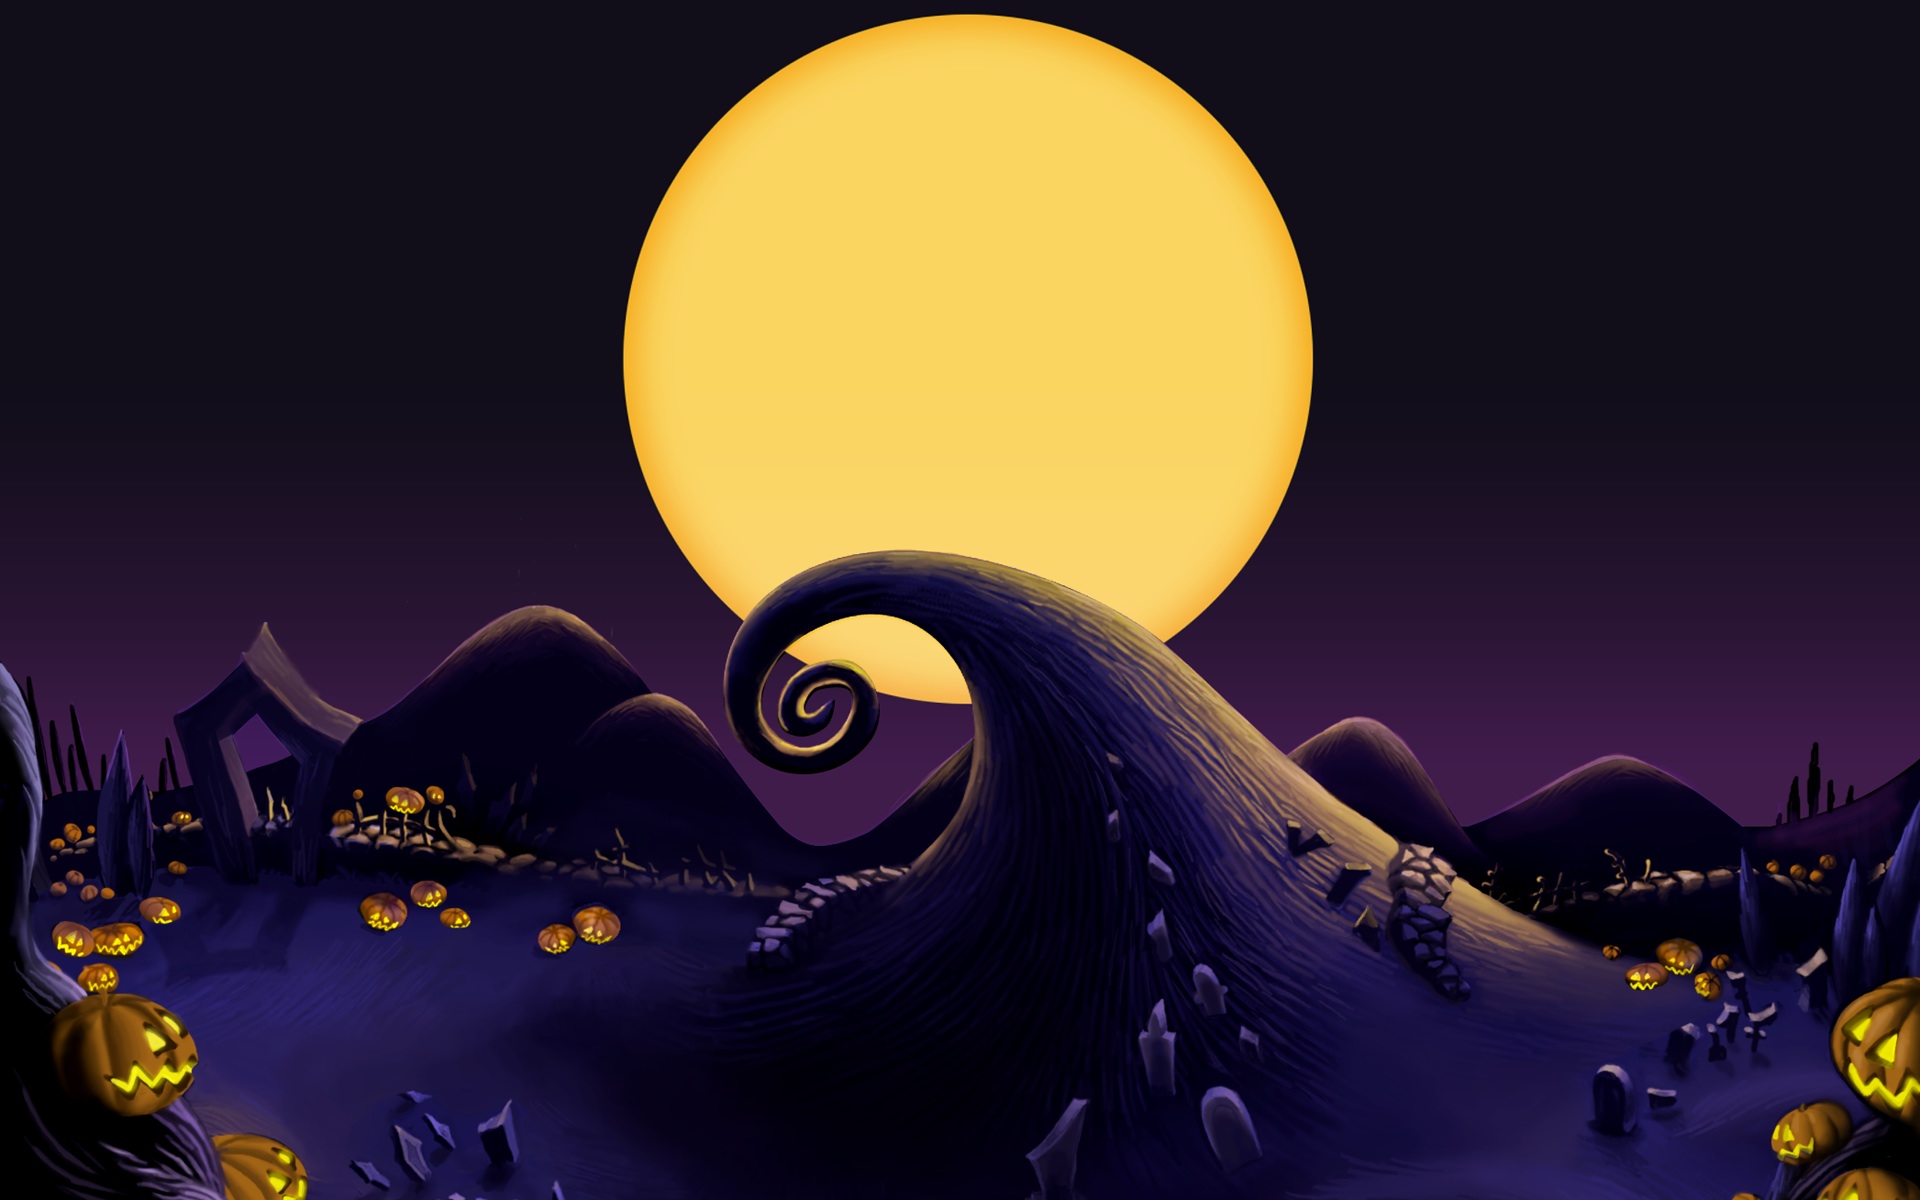 The Nightmare Before Christmas Landscape Wallpaper And Stock Photos